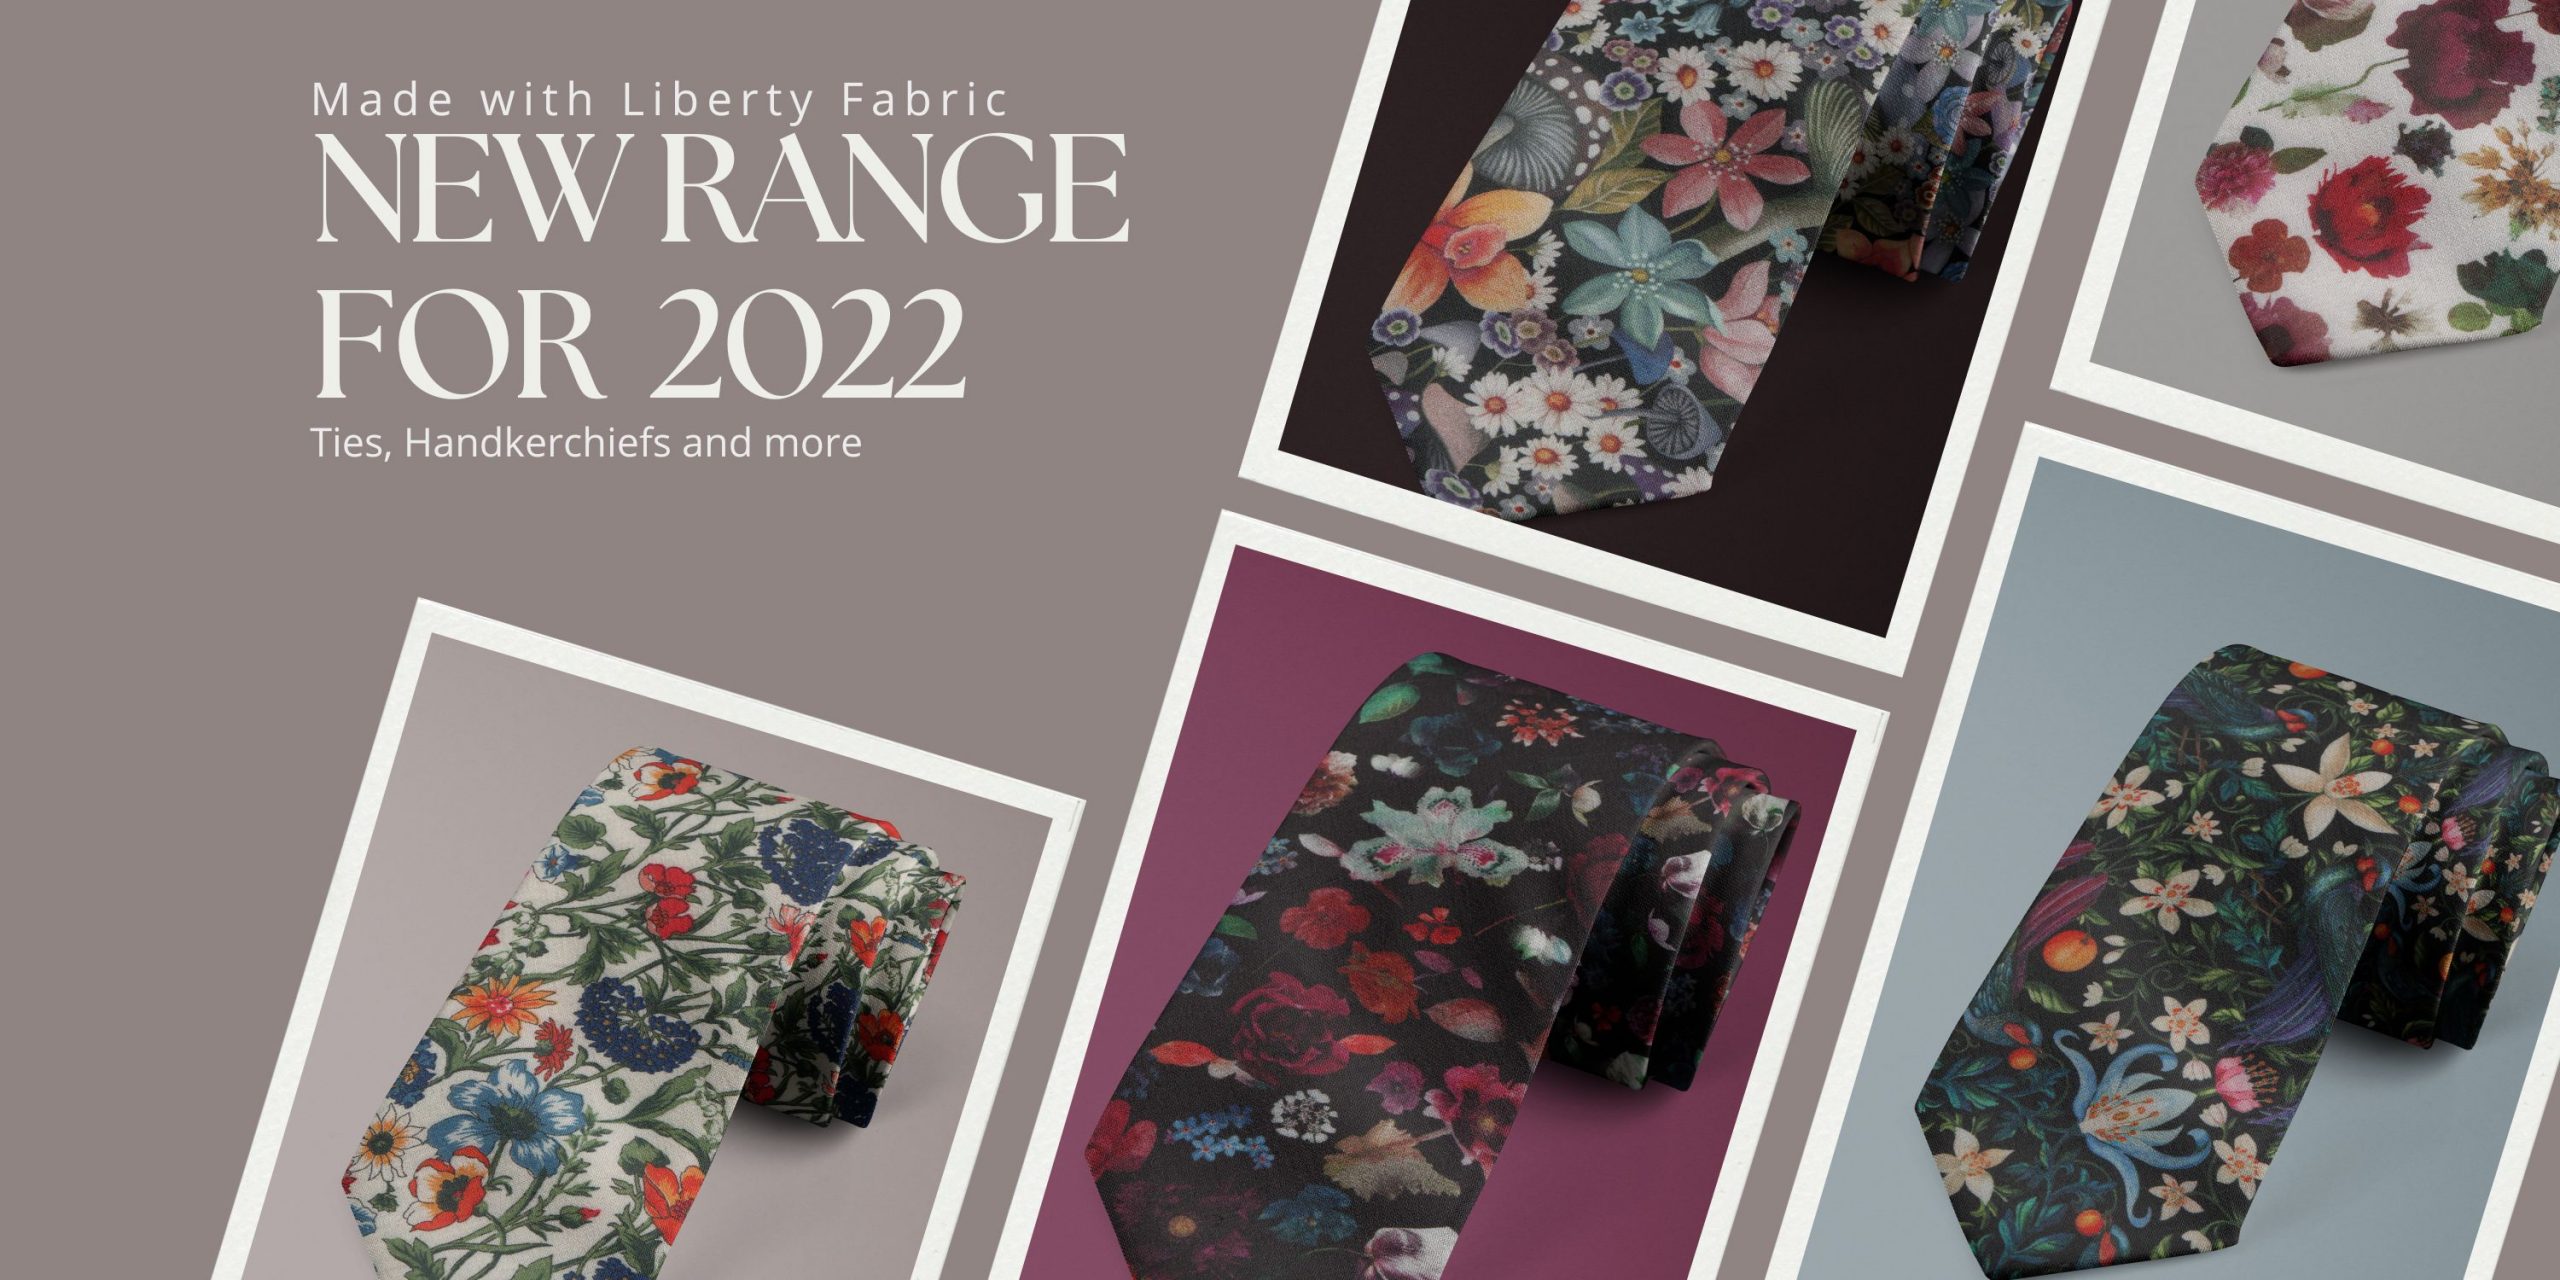 New 2022 Liberty Fabric Ties and Handkerchiefs to buy online from Black Tie